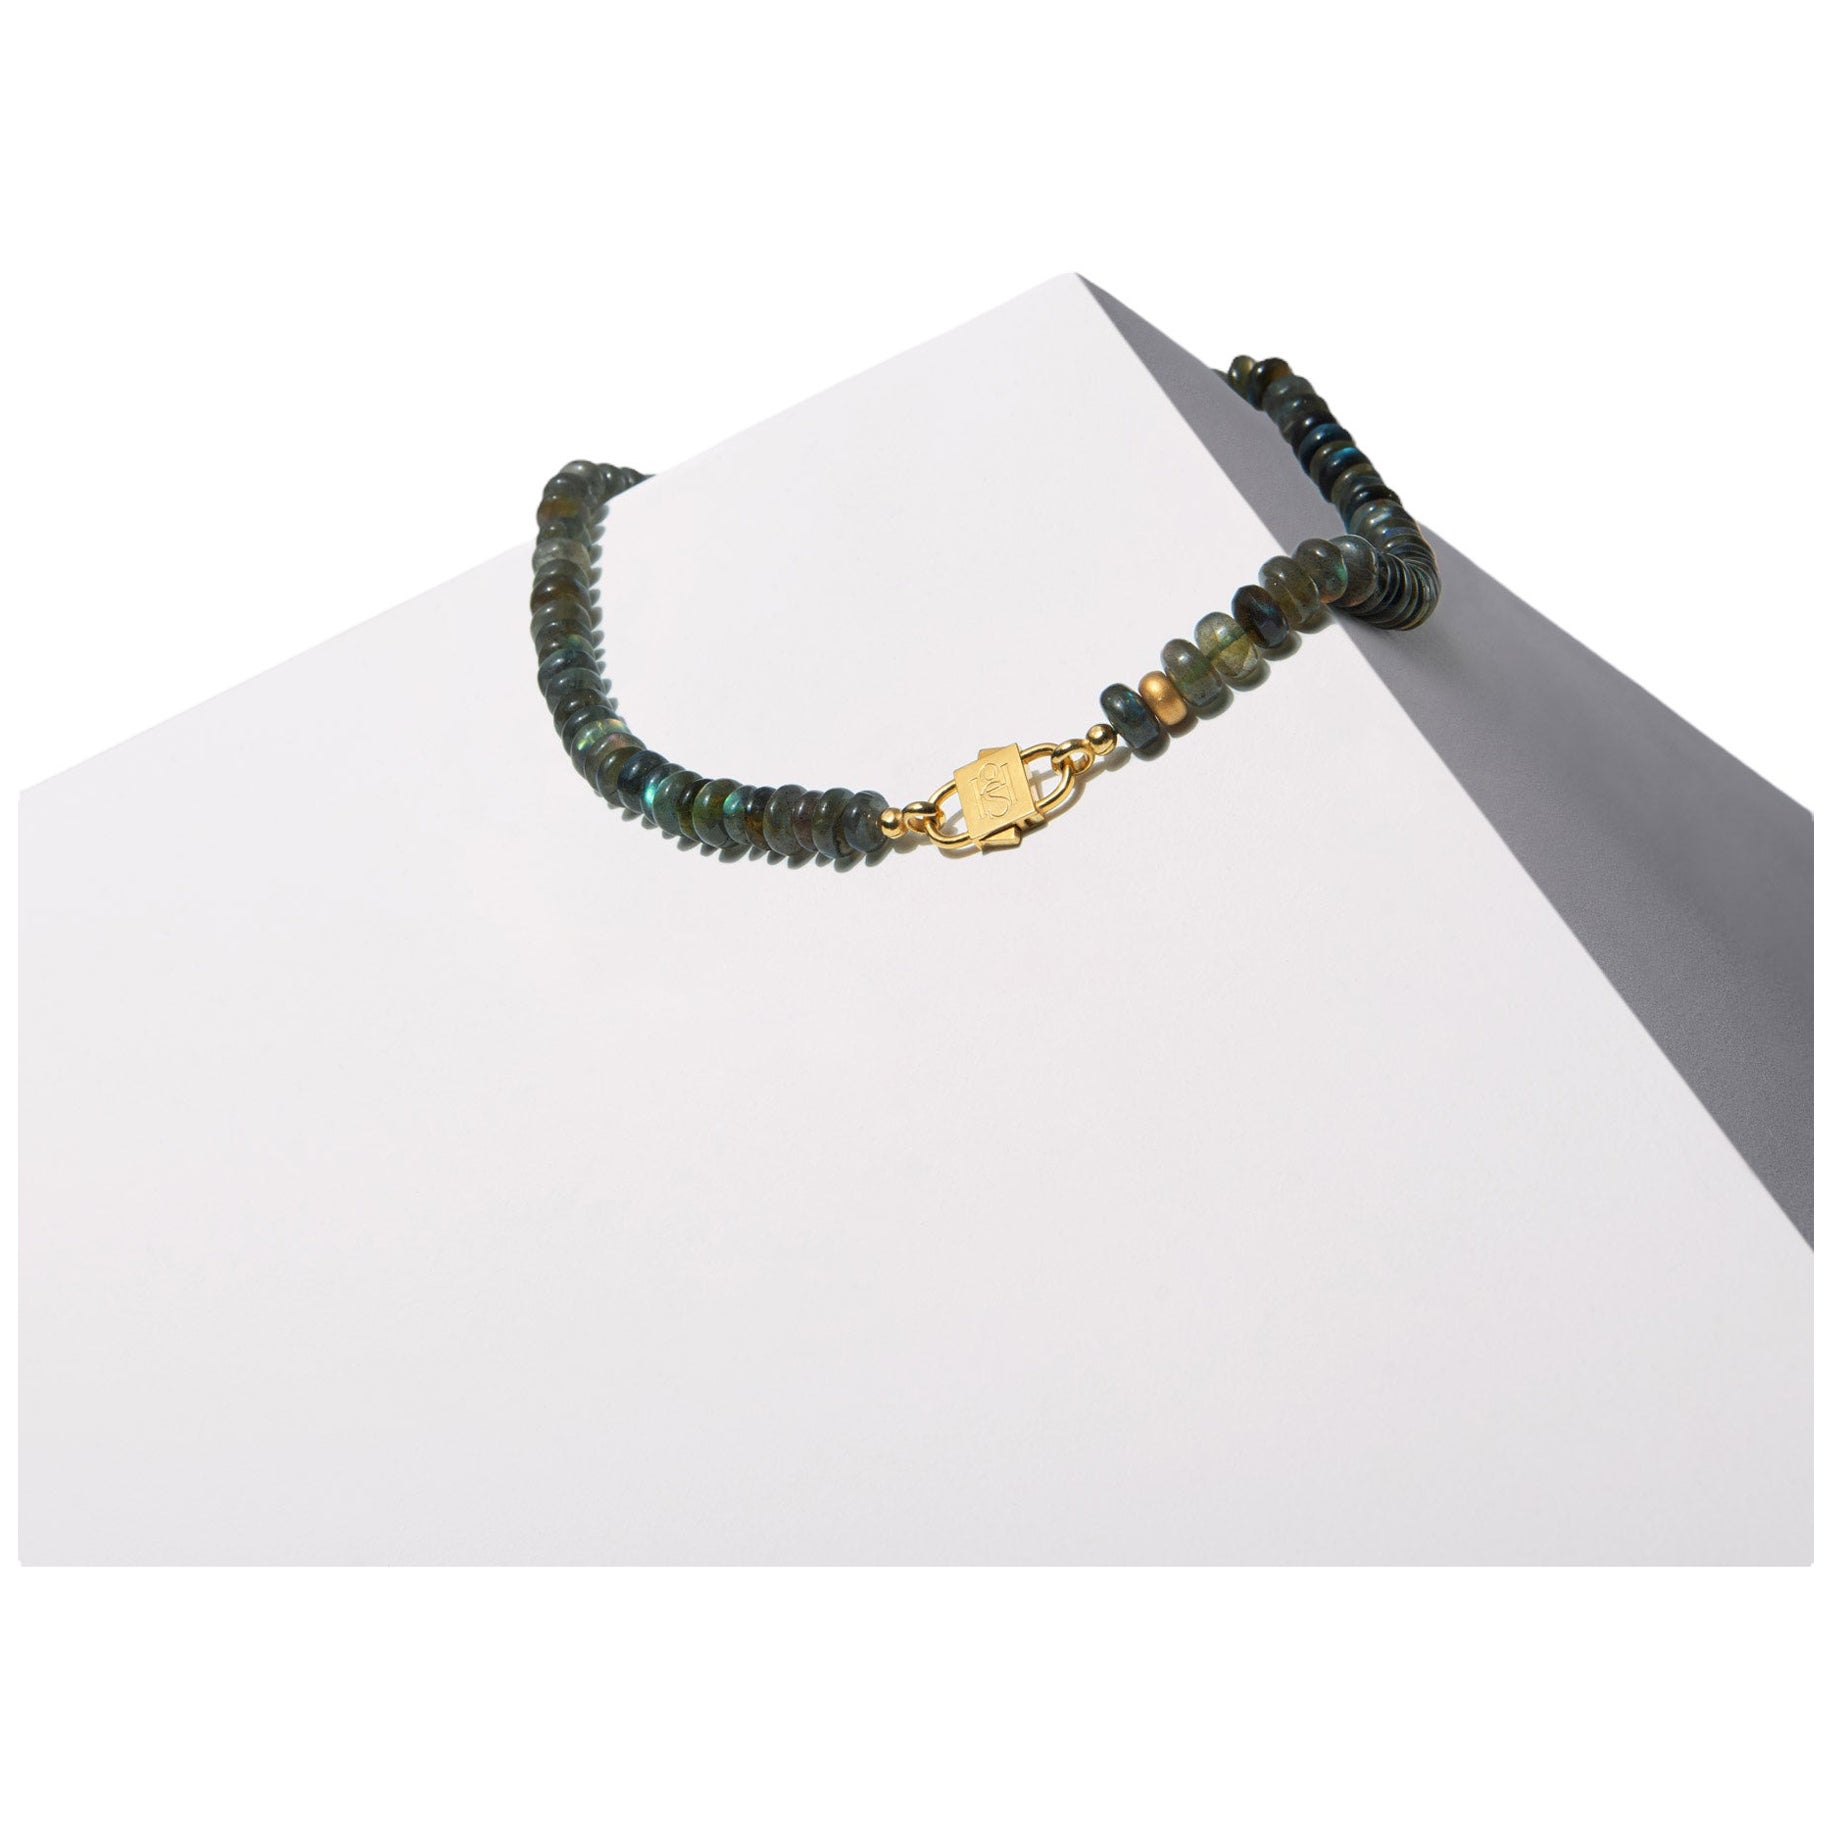 House of Sol Labradorite Necklace with Baby HoS Lock